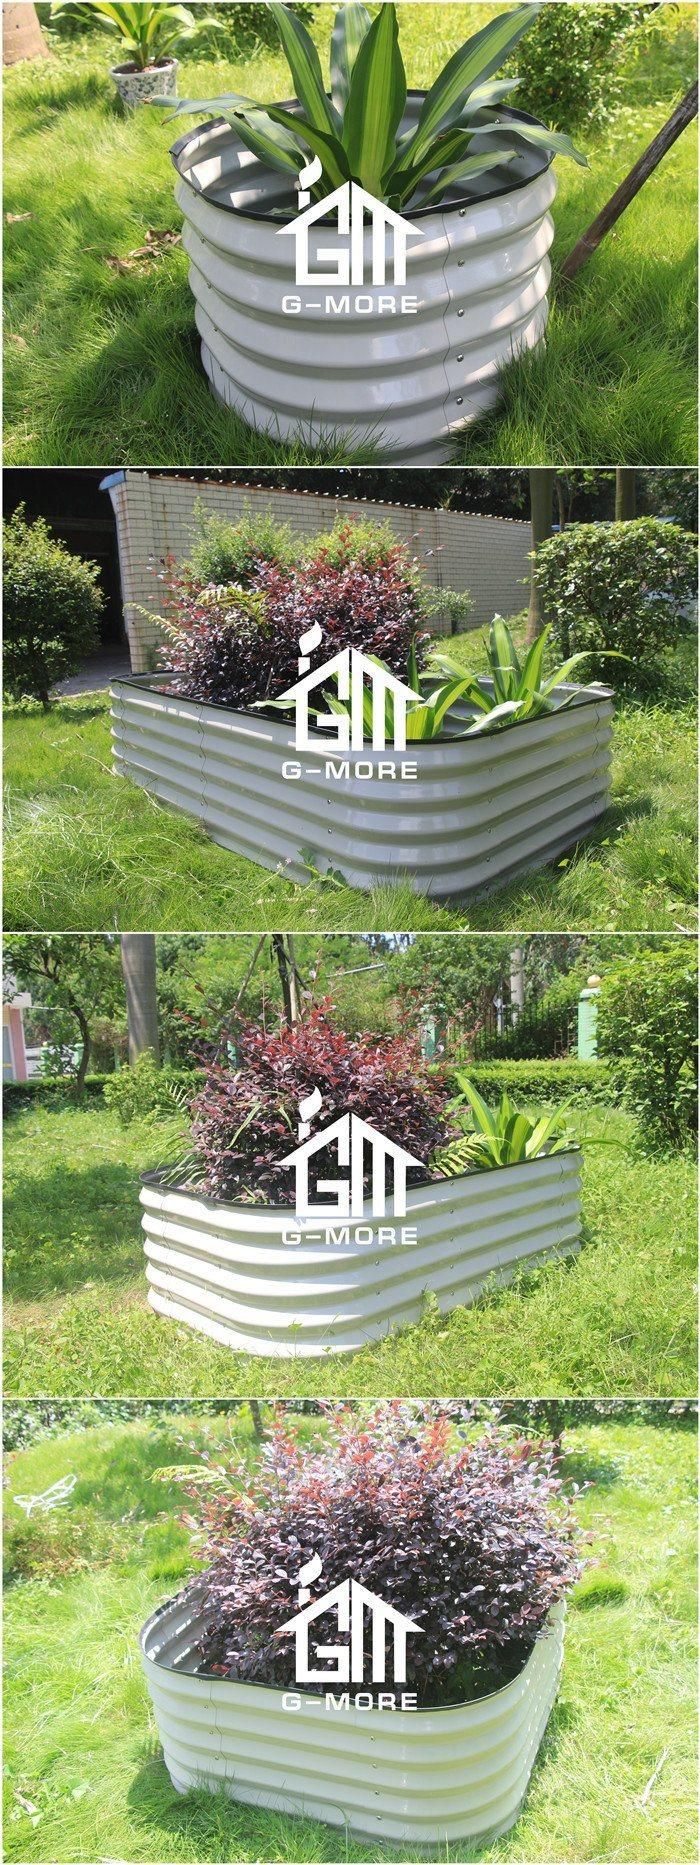 90X120X44cm Outdoor Steel Raised Garden Bed Sliver/Ivory Raised Seed Beds